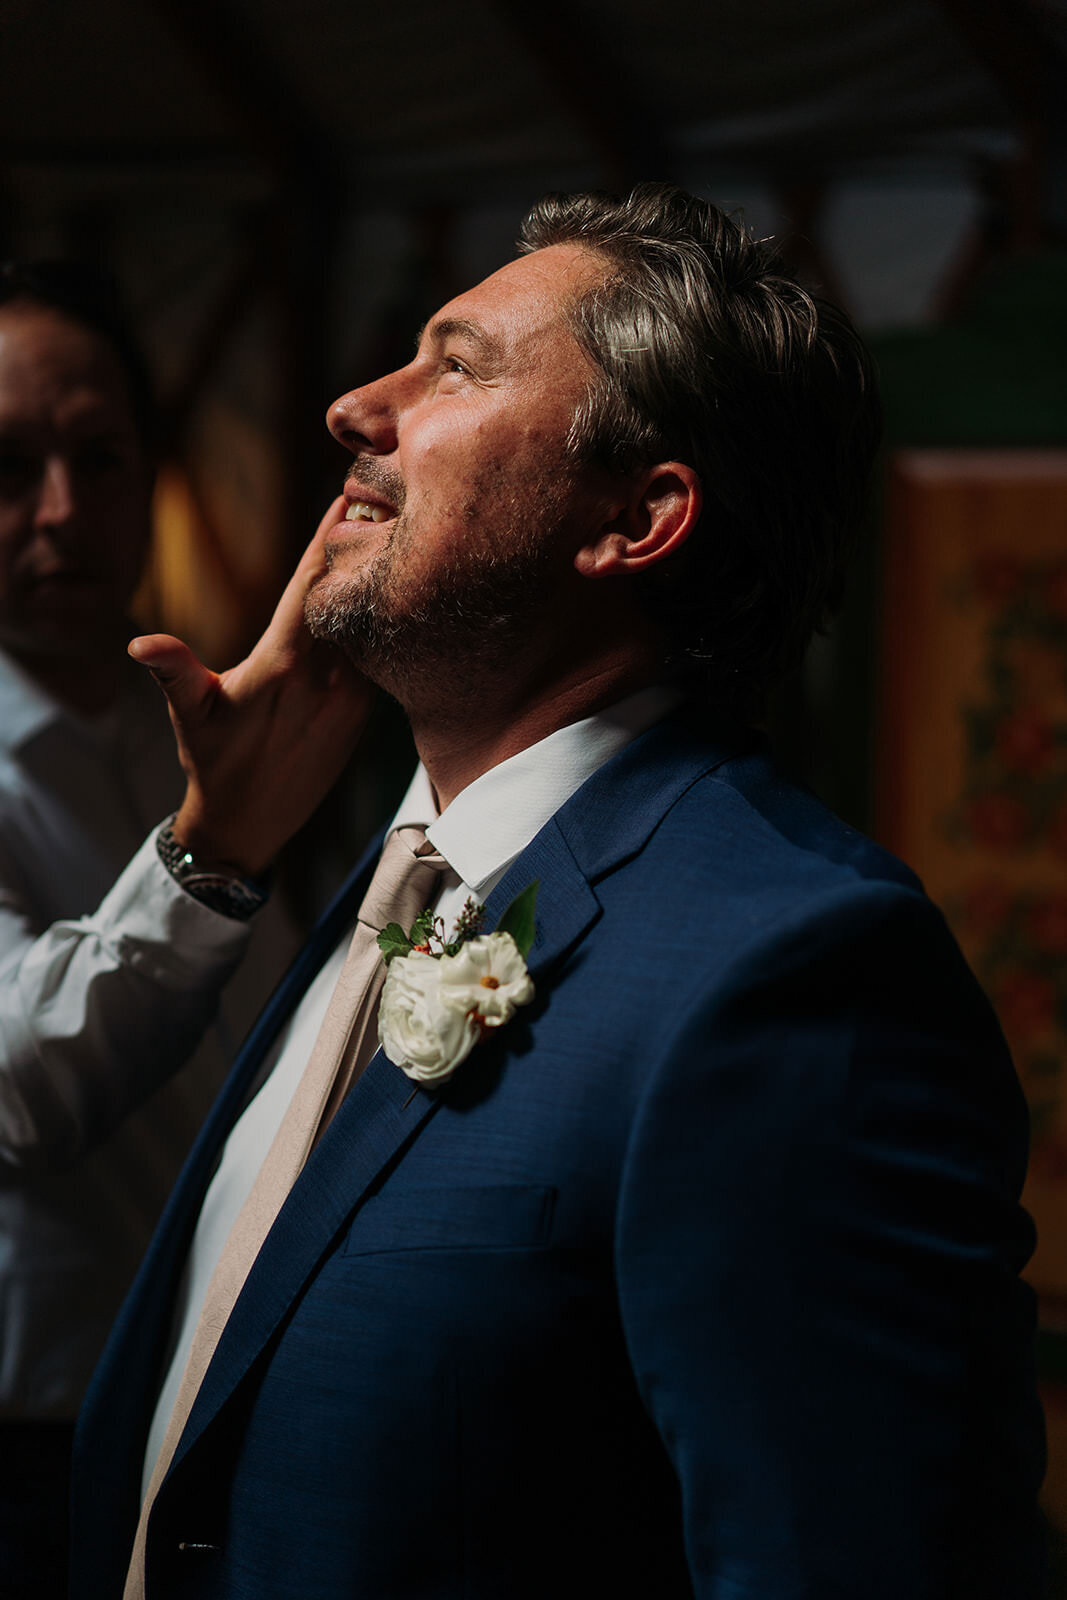 A groom looking up and smiling as someone touches their face.